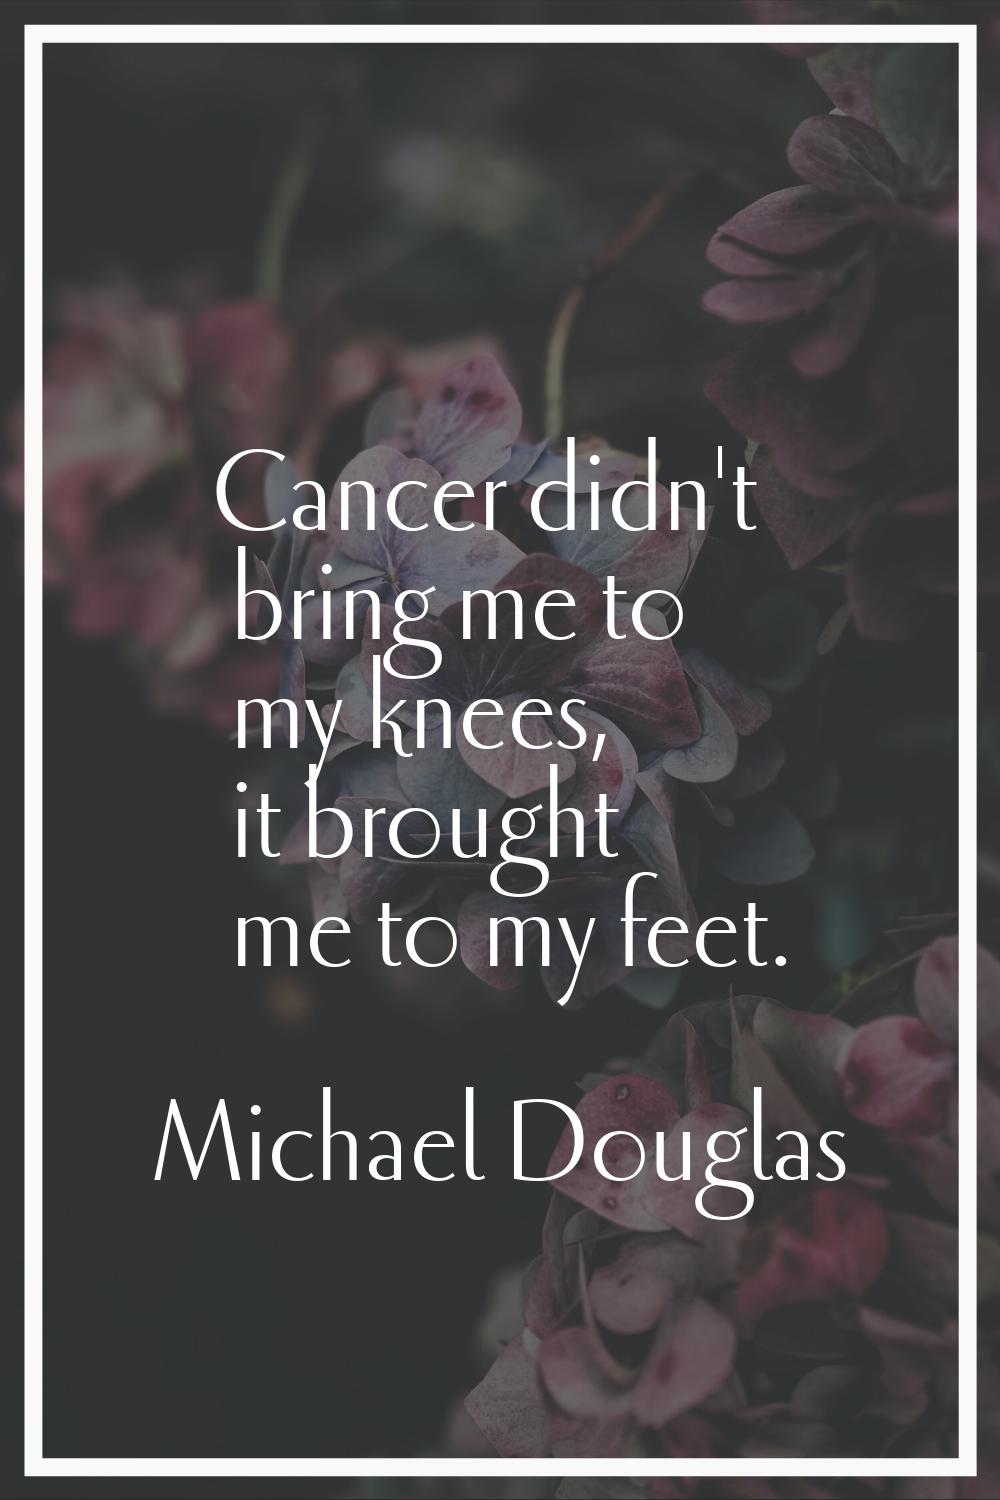 Cancer didn't bring me to my knees, it brought me to my feet.